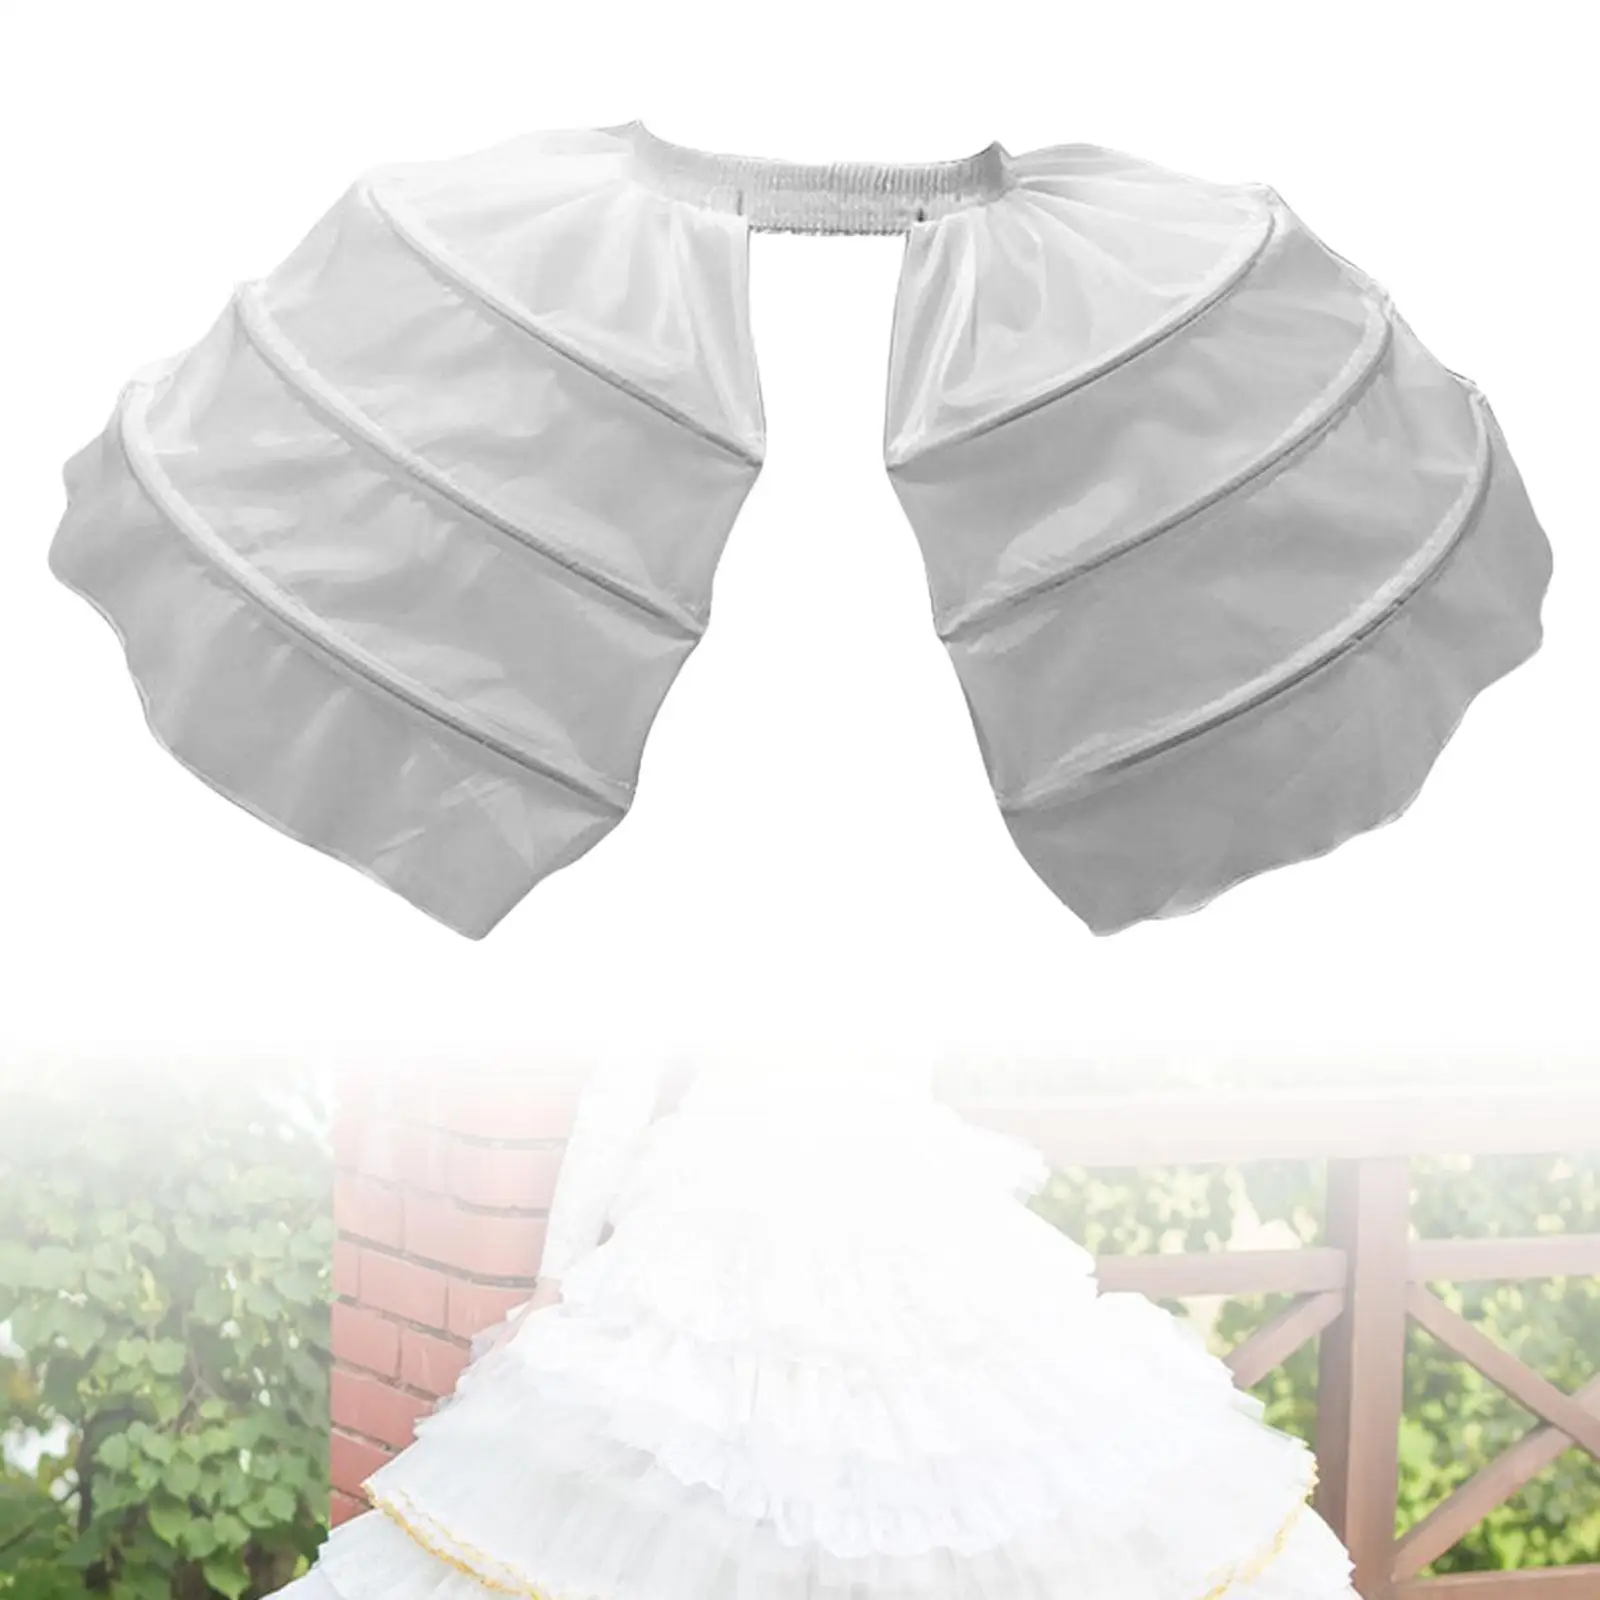 Dress Bilateral Petticoat Baroque Cage Dress Stage Performance Crinoline Underskirt for Girls Ladies Women Costume Role Play